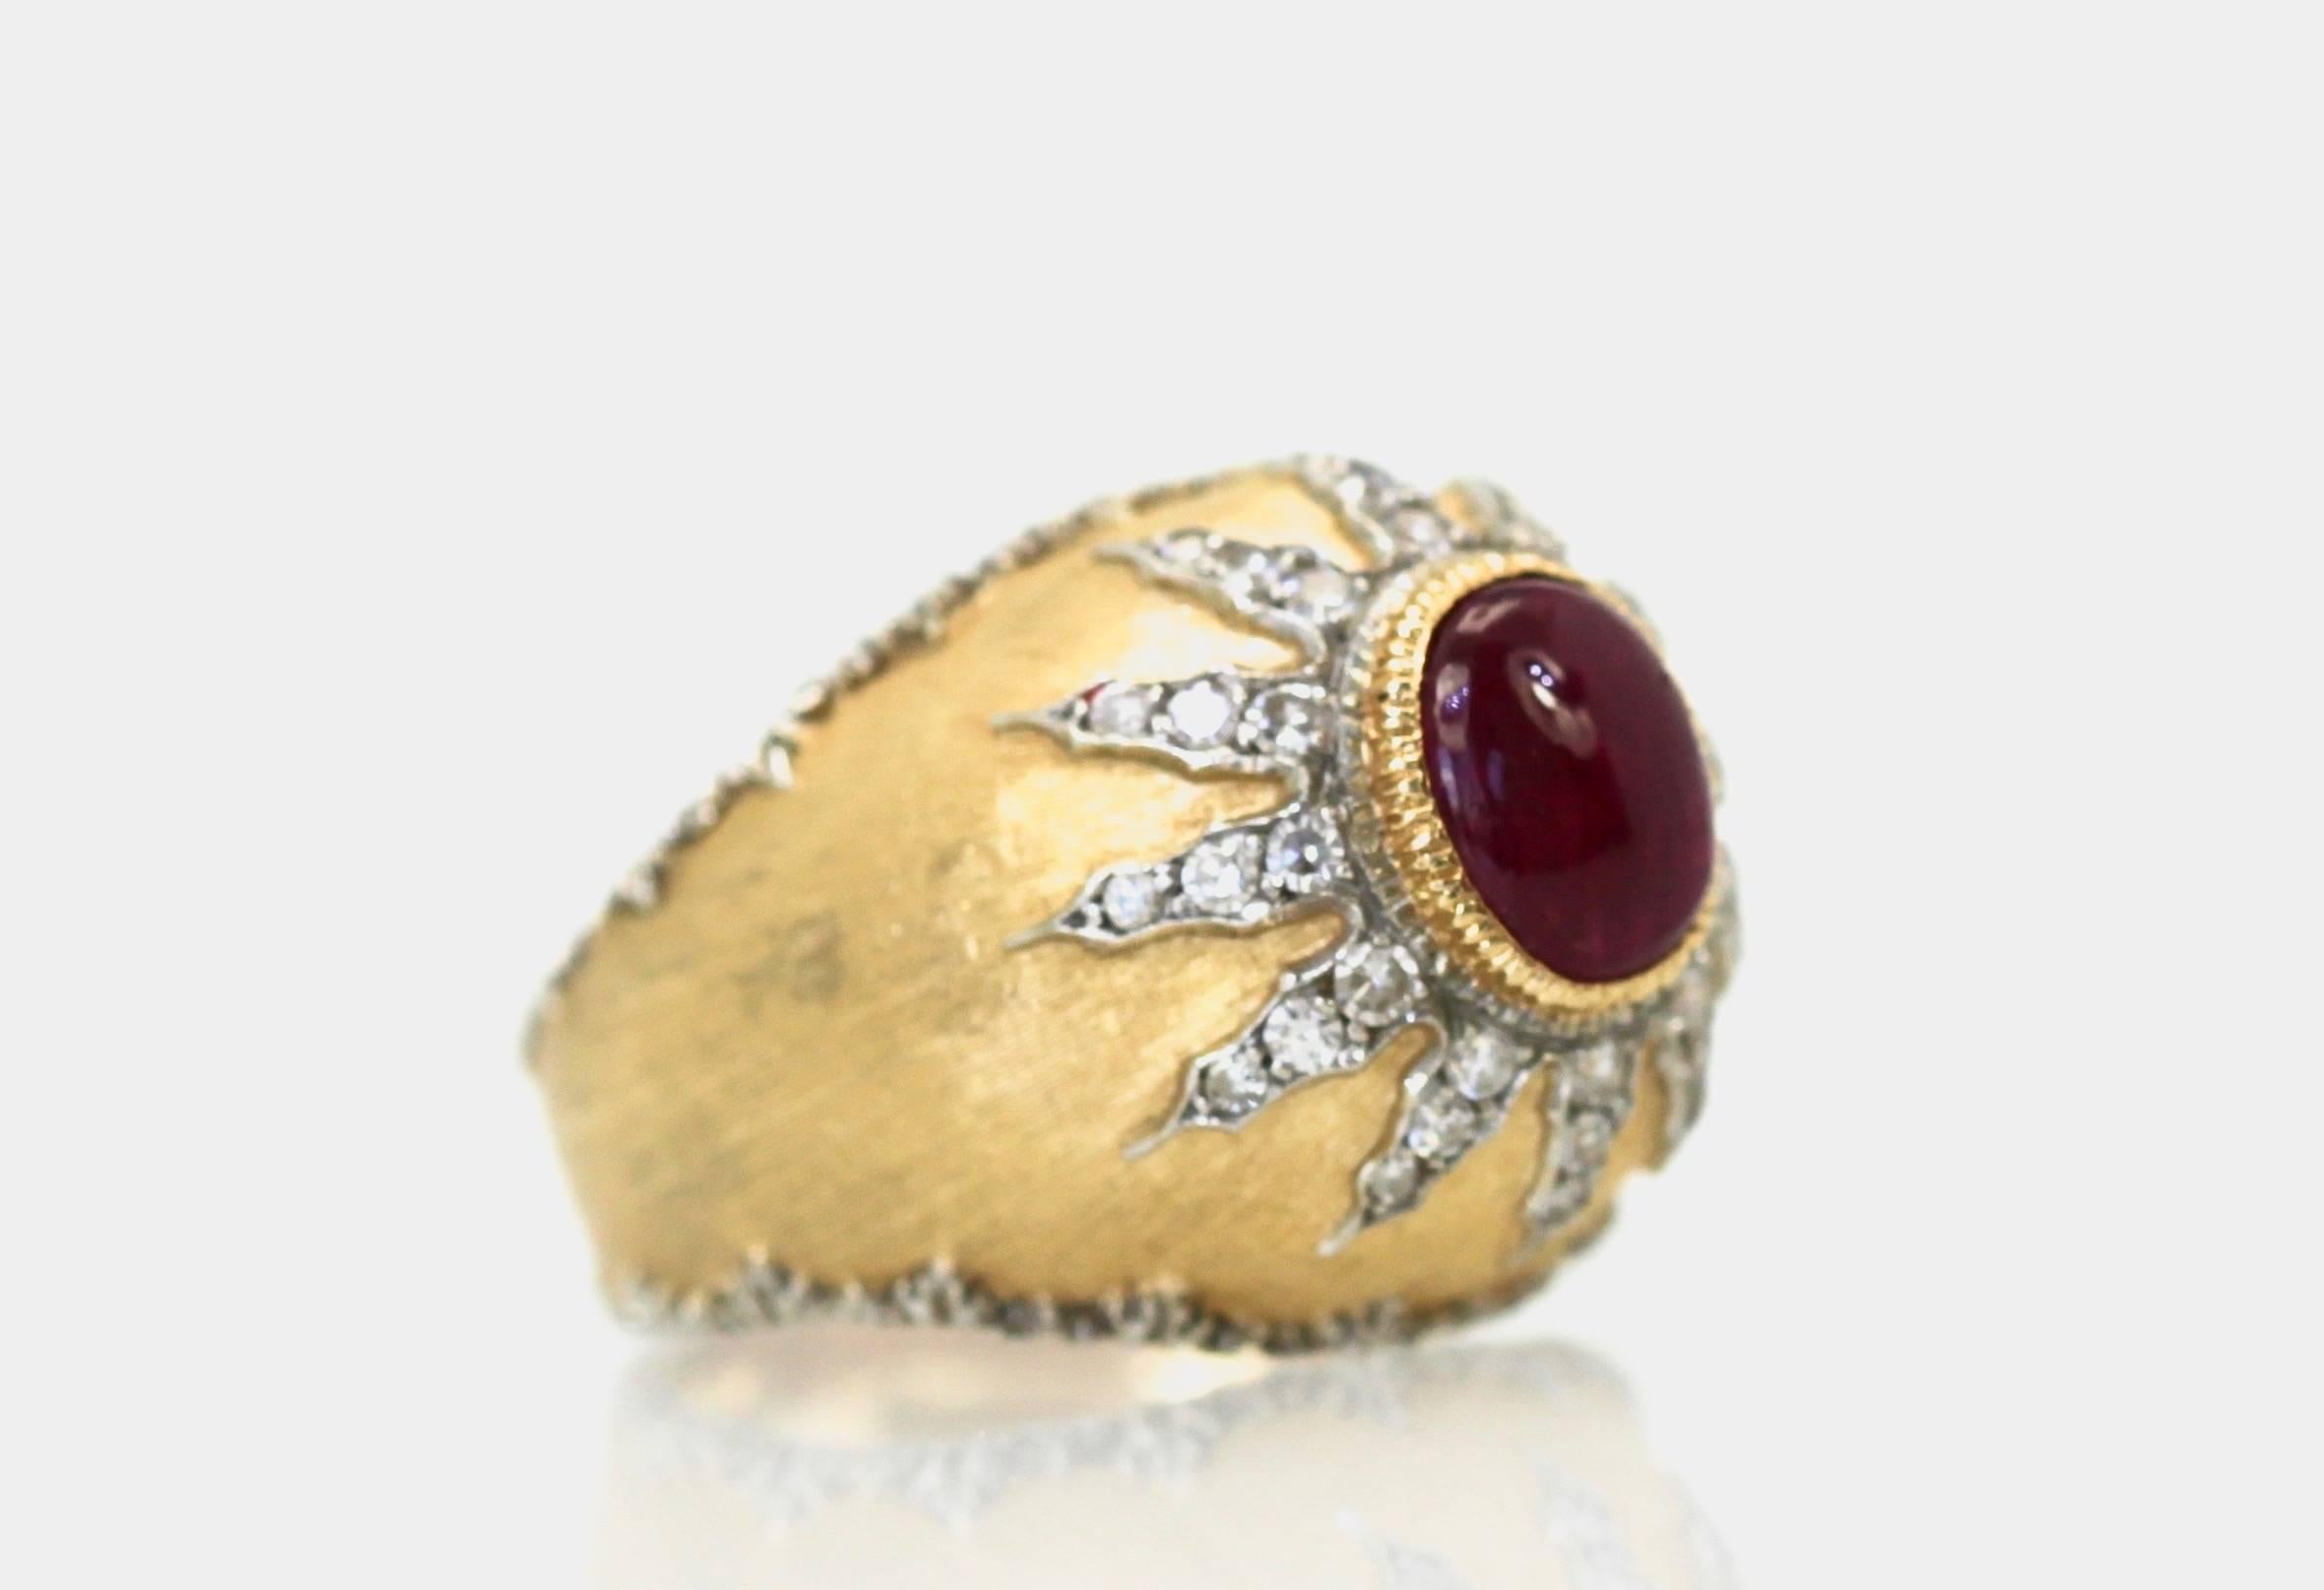 This gorgeous ring is classic Buccellati in a bombe shape with a 12.55mm rise above the finger. It features a 2 carat center ruby with a 2 carat diamond starburst surround. Made in Italy.

Weight: 11.6 grams 
Size: 6 3/4 
Metal: 18k yellow gold